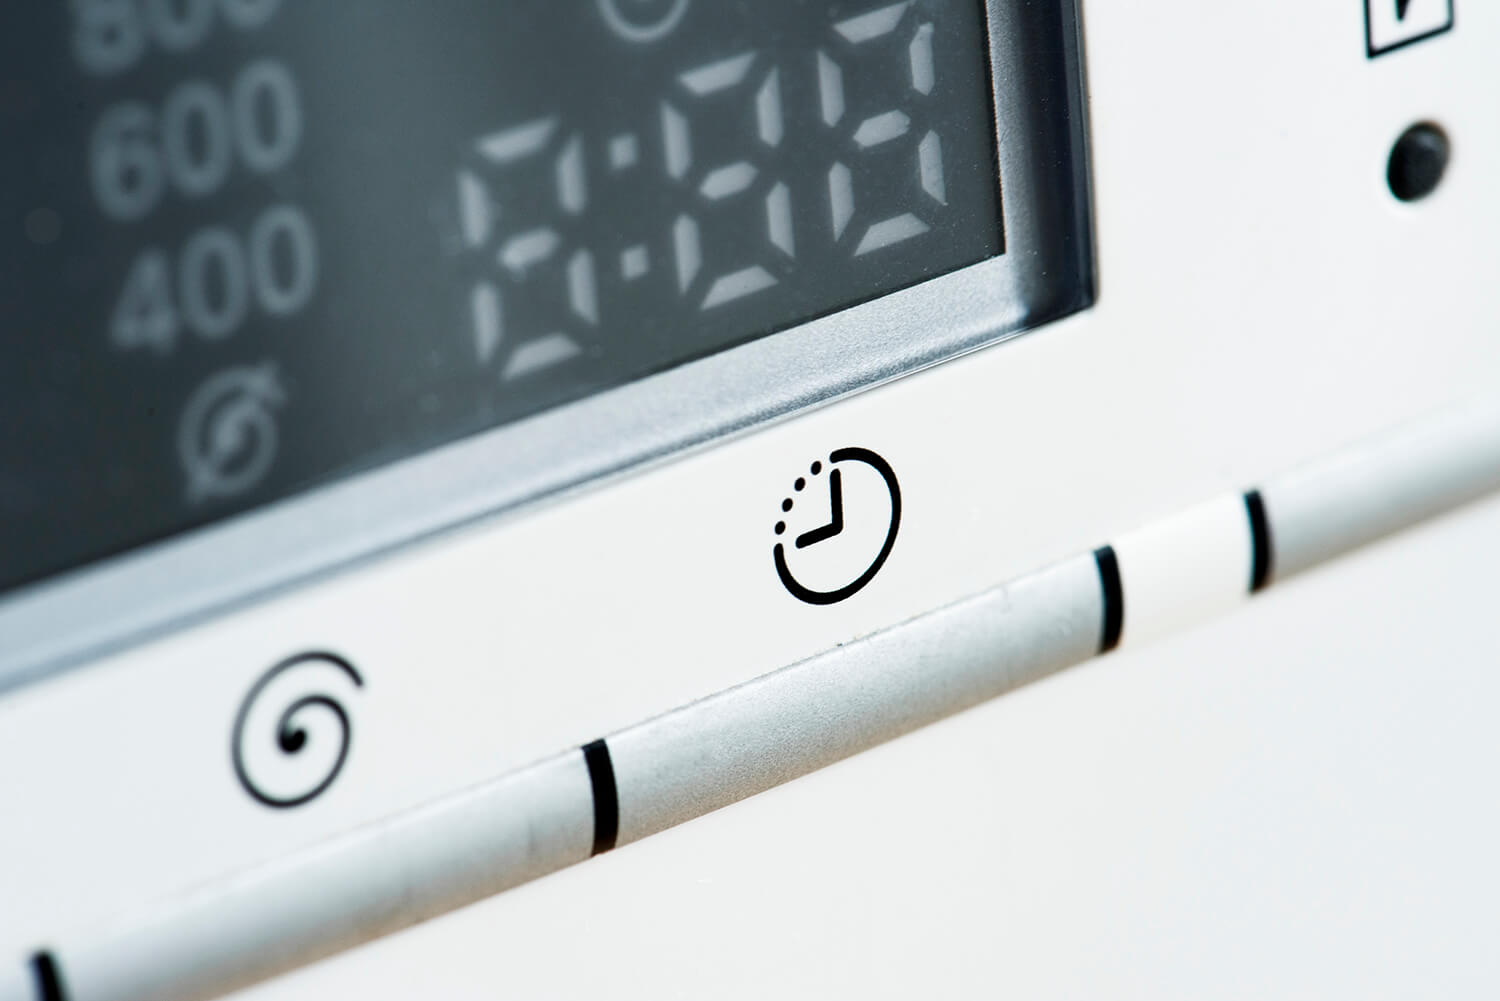 Thermostats and the advantages of how far they have come